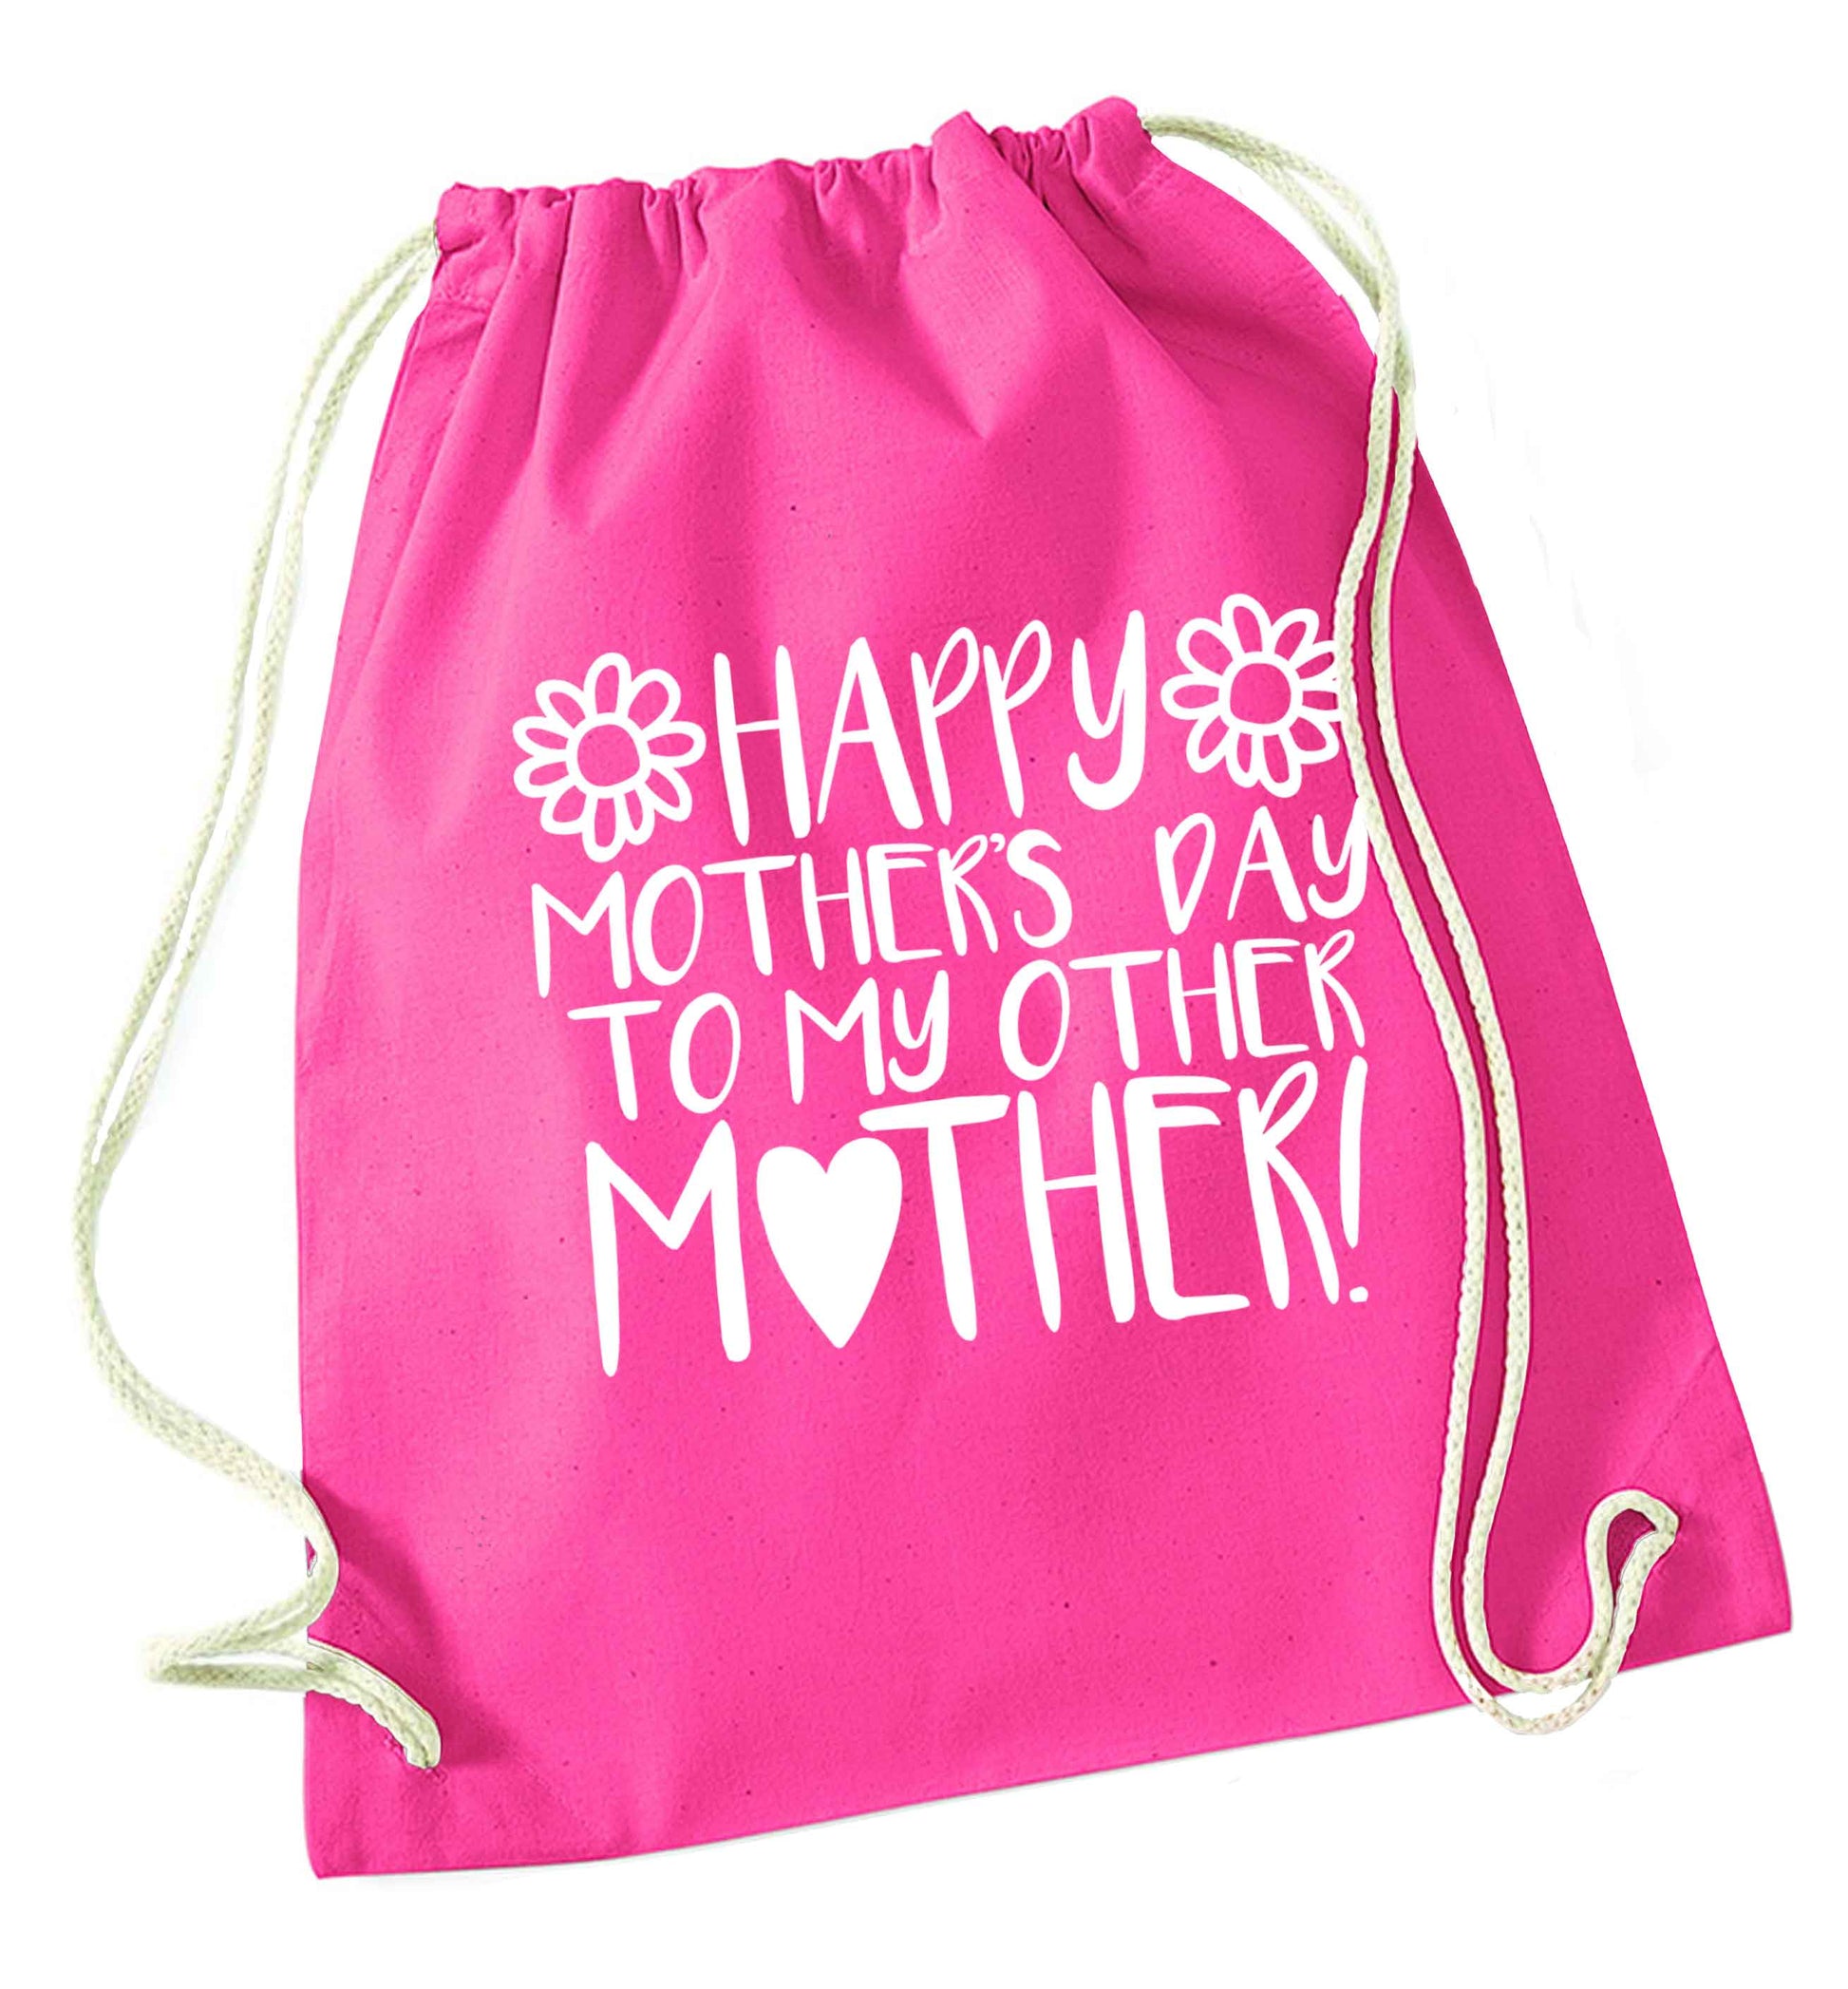 Happy mother's day to my other mother pink drawstring bag